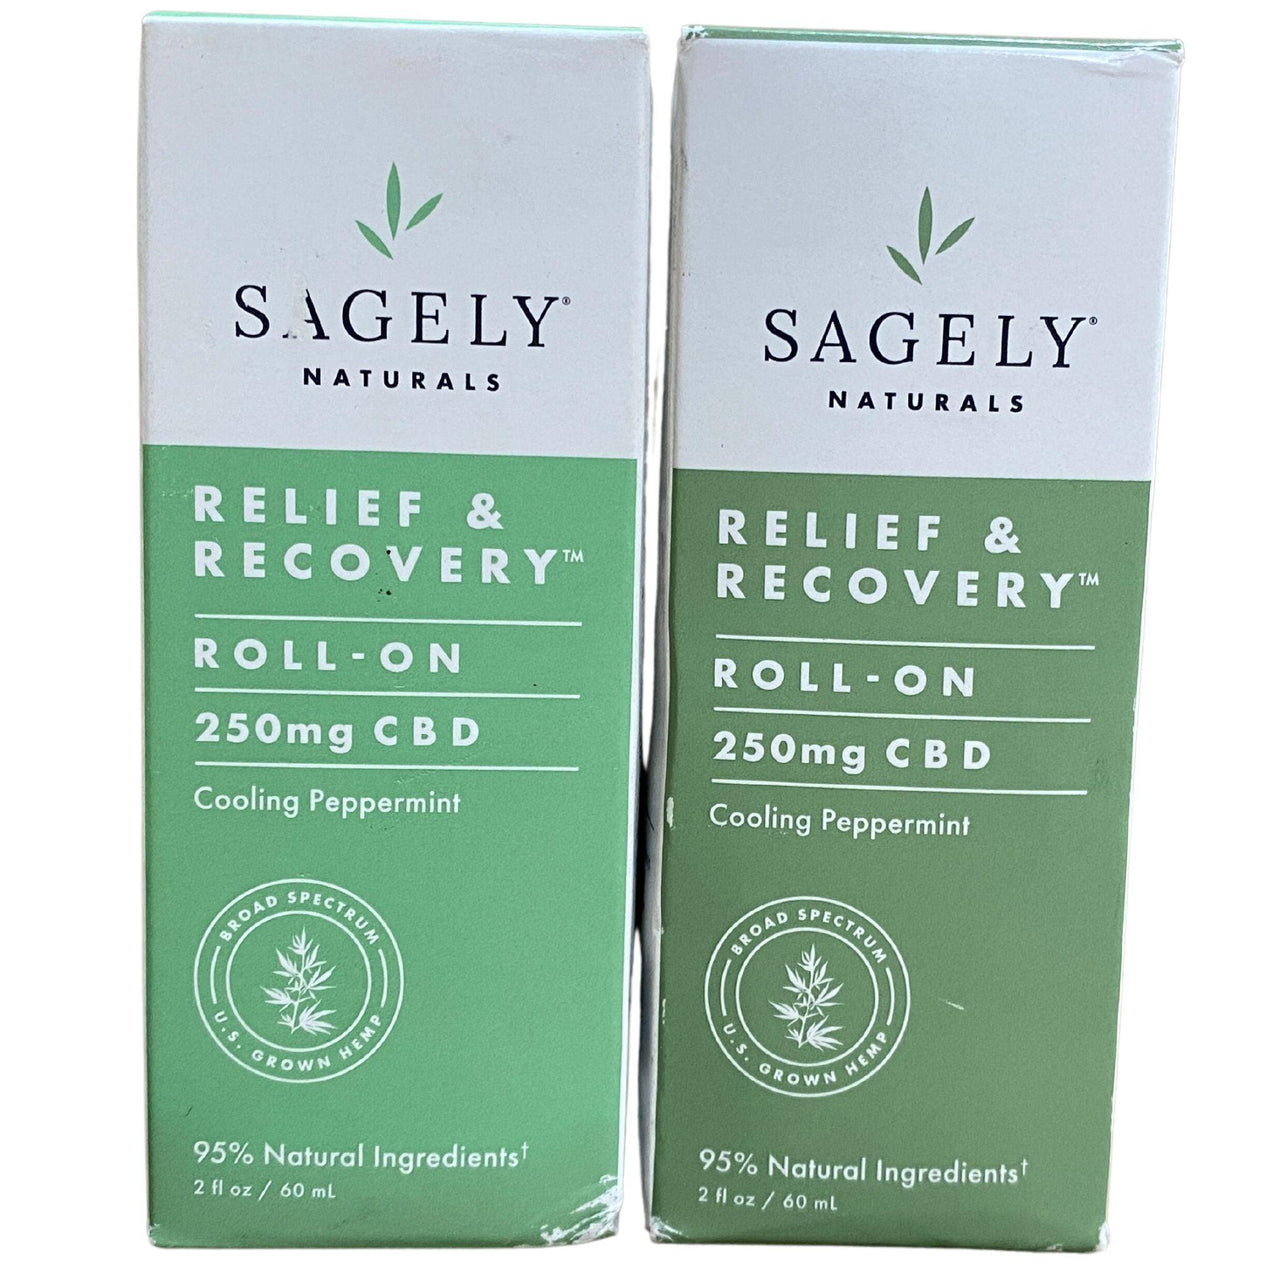 Relief & Recovery ROLL ON 250mg CBD (50 Pcs Lot) - Discount Wholesalers Inc